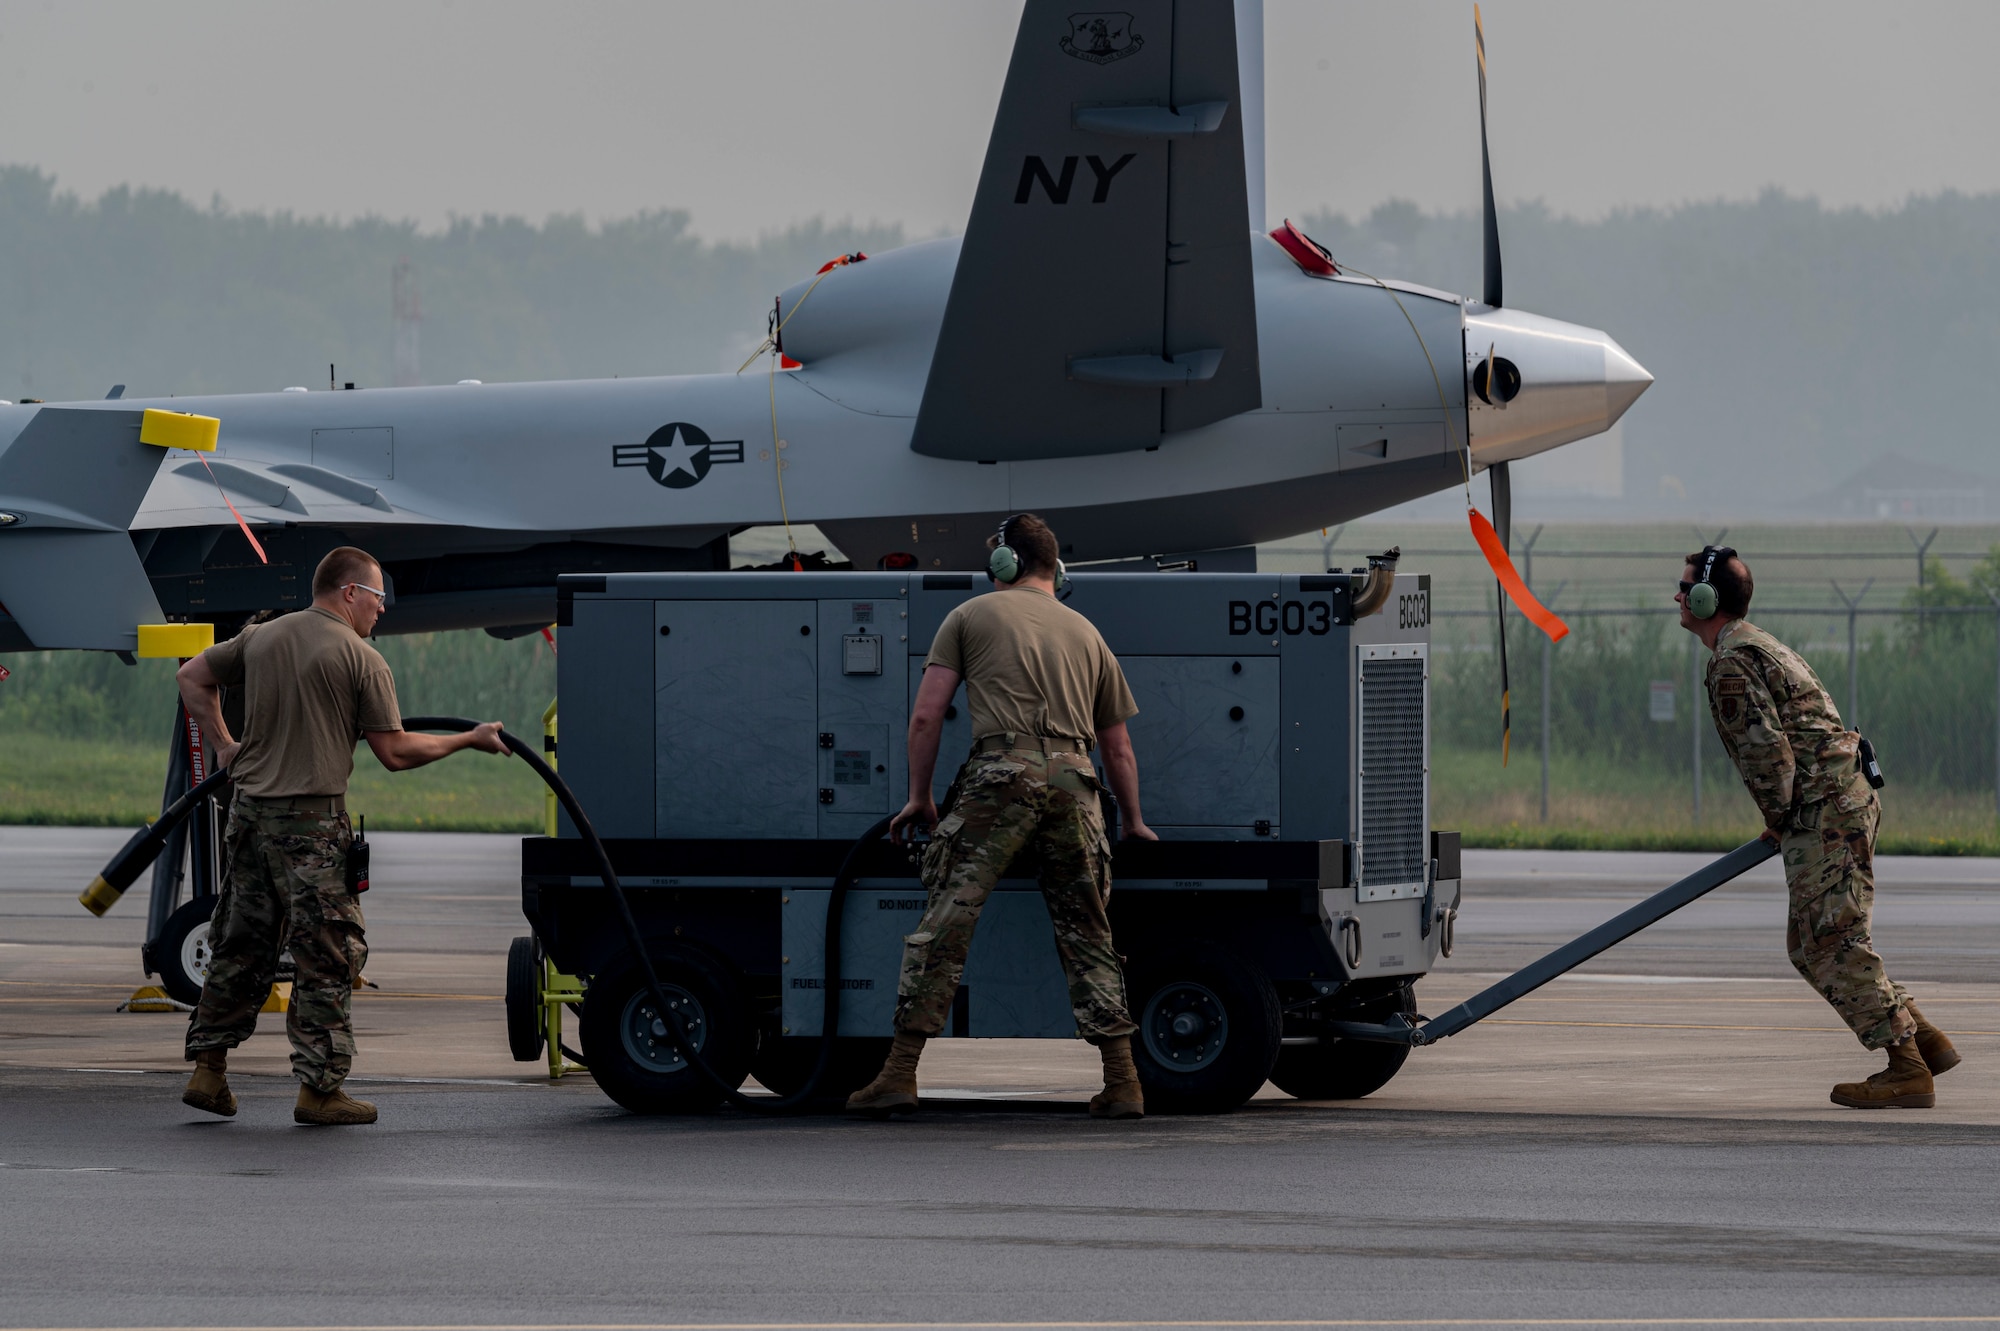 Airmen From the 491st Attack Squadron and 174th Attack Wing prepare to fuel an MQ-9 Reaper at Hancock Field Air National Guard Base, New York, June 29, 2023.The 491st ATKS is composed of both active duty and Air National Guard personnel responsible for training student pilots and sensor operators how to operate an MQ-9 Reaper. (U.S. Air Force photo by Airman 1st Class Isaiah Pedrazzini)